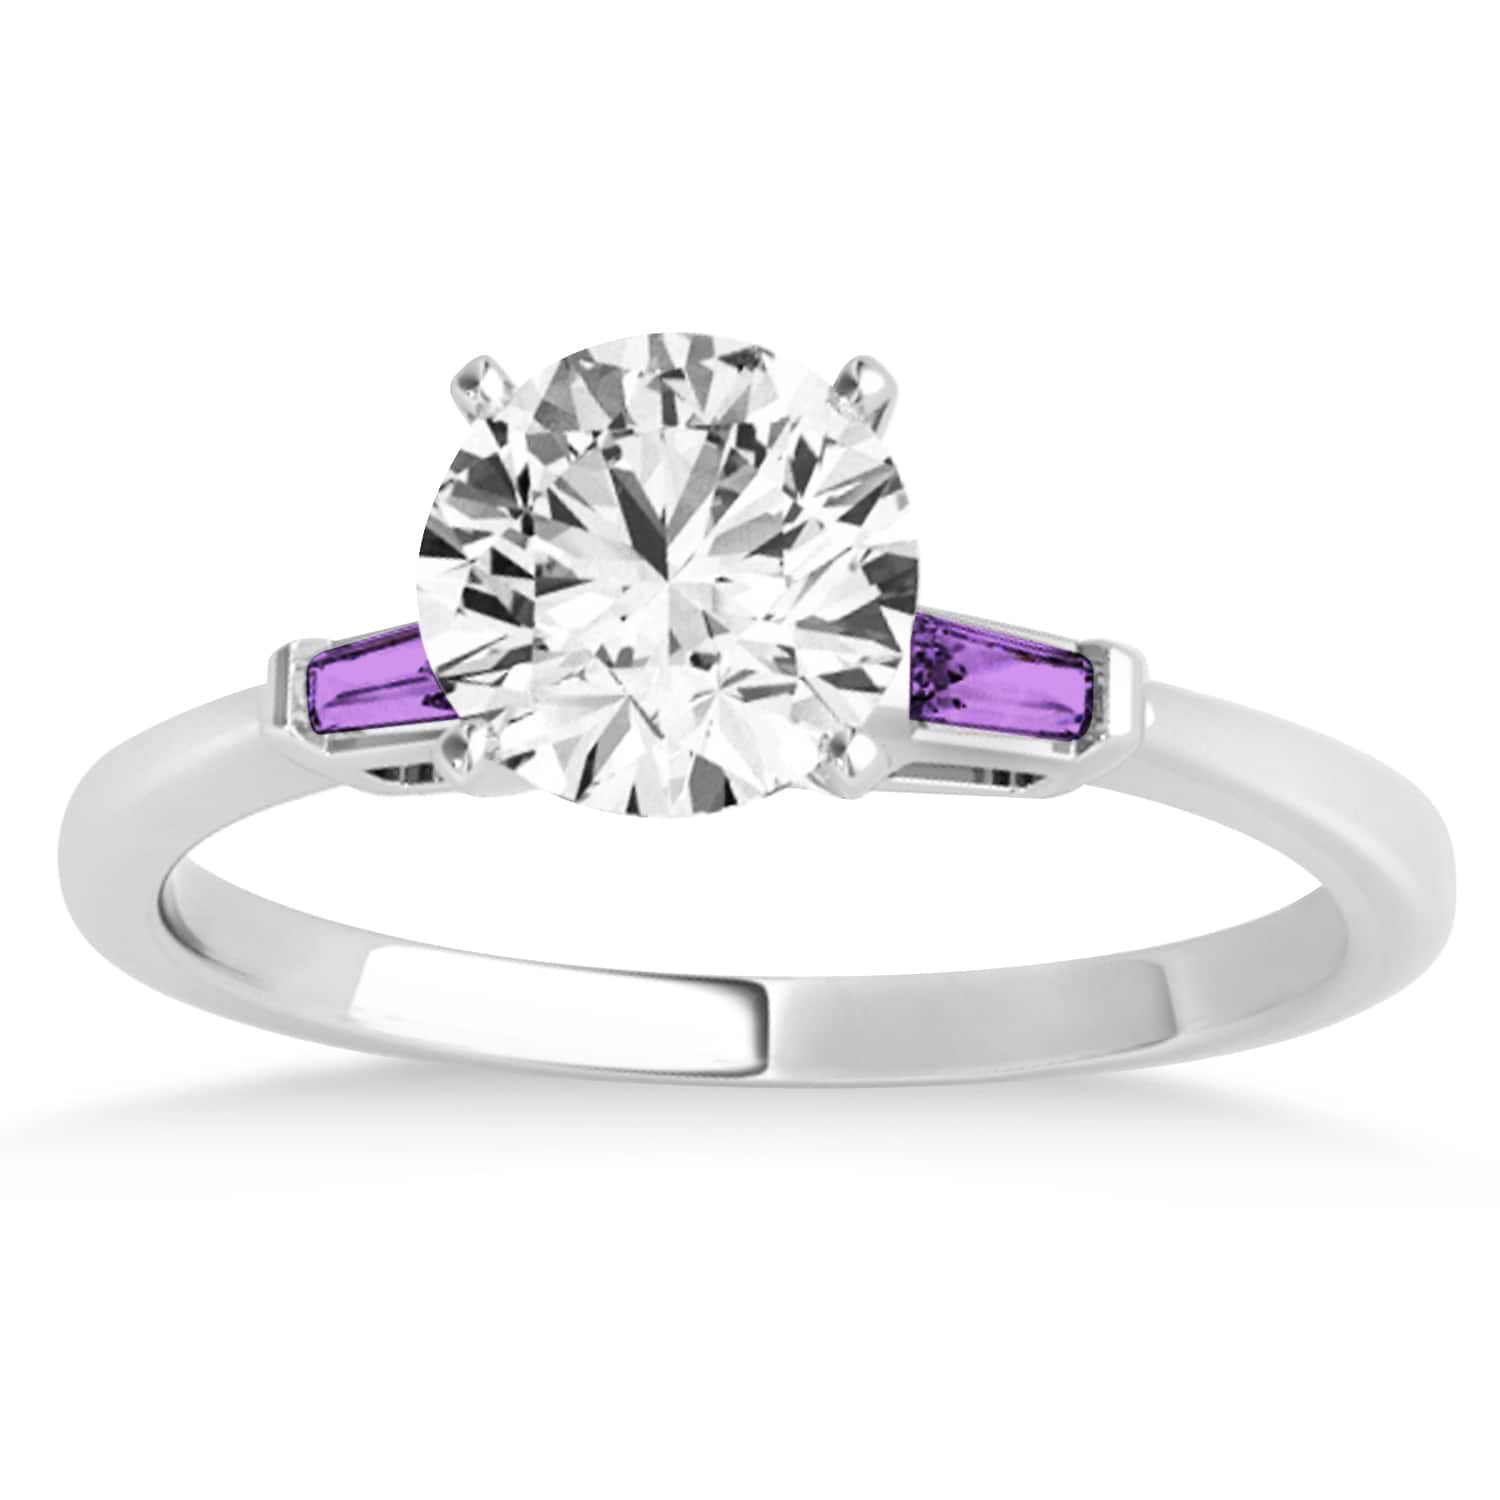 Tapered Baguette 3-Stone Amethyst Engagement Ring 18k White Gold (0.10ct)